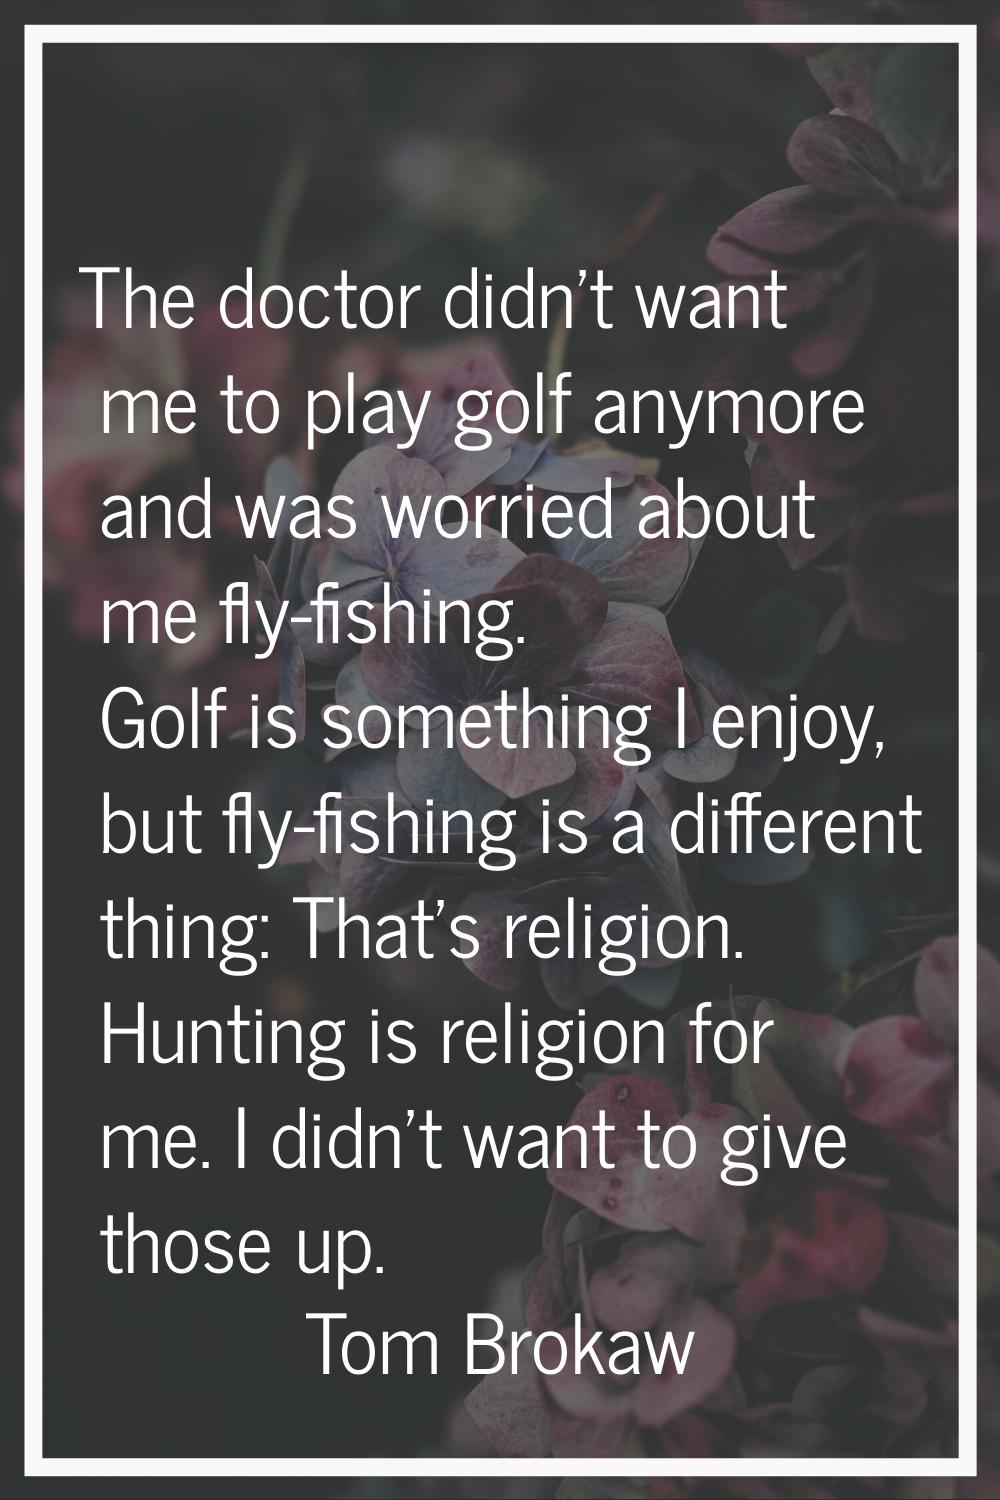 The doctor didn't want me to play golf anymore and was worried about me fly-fishing. Golf is someth